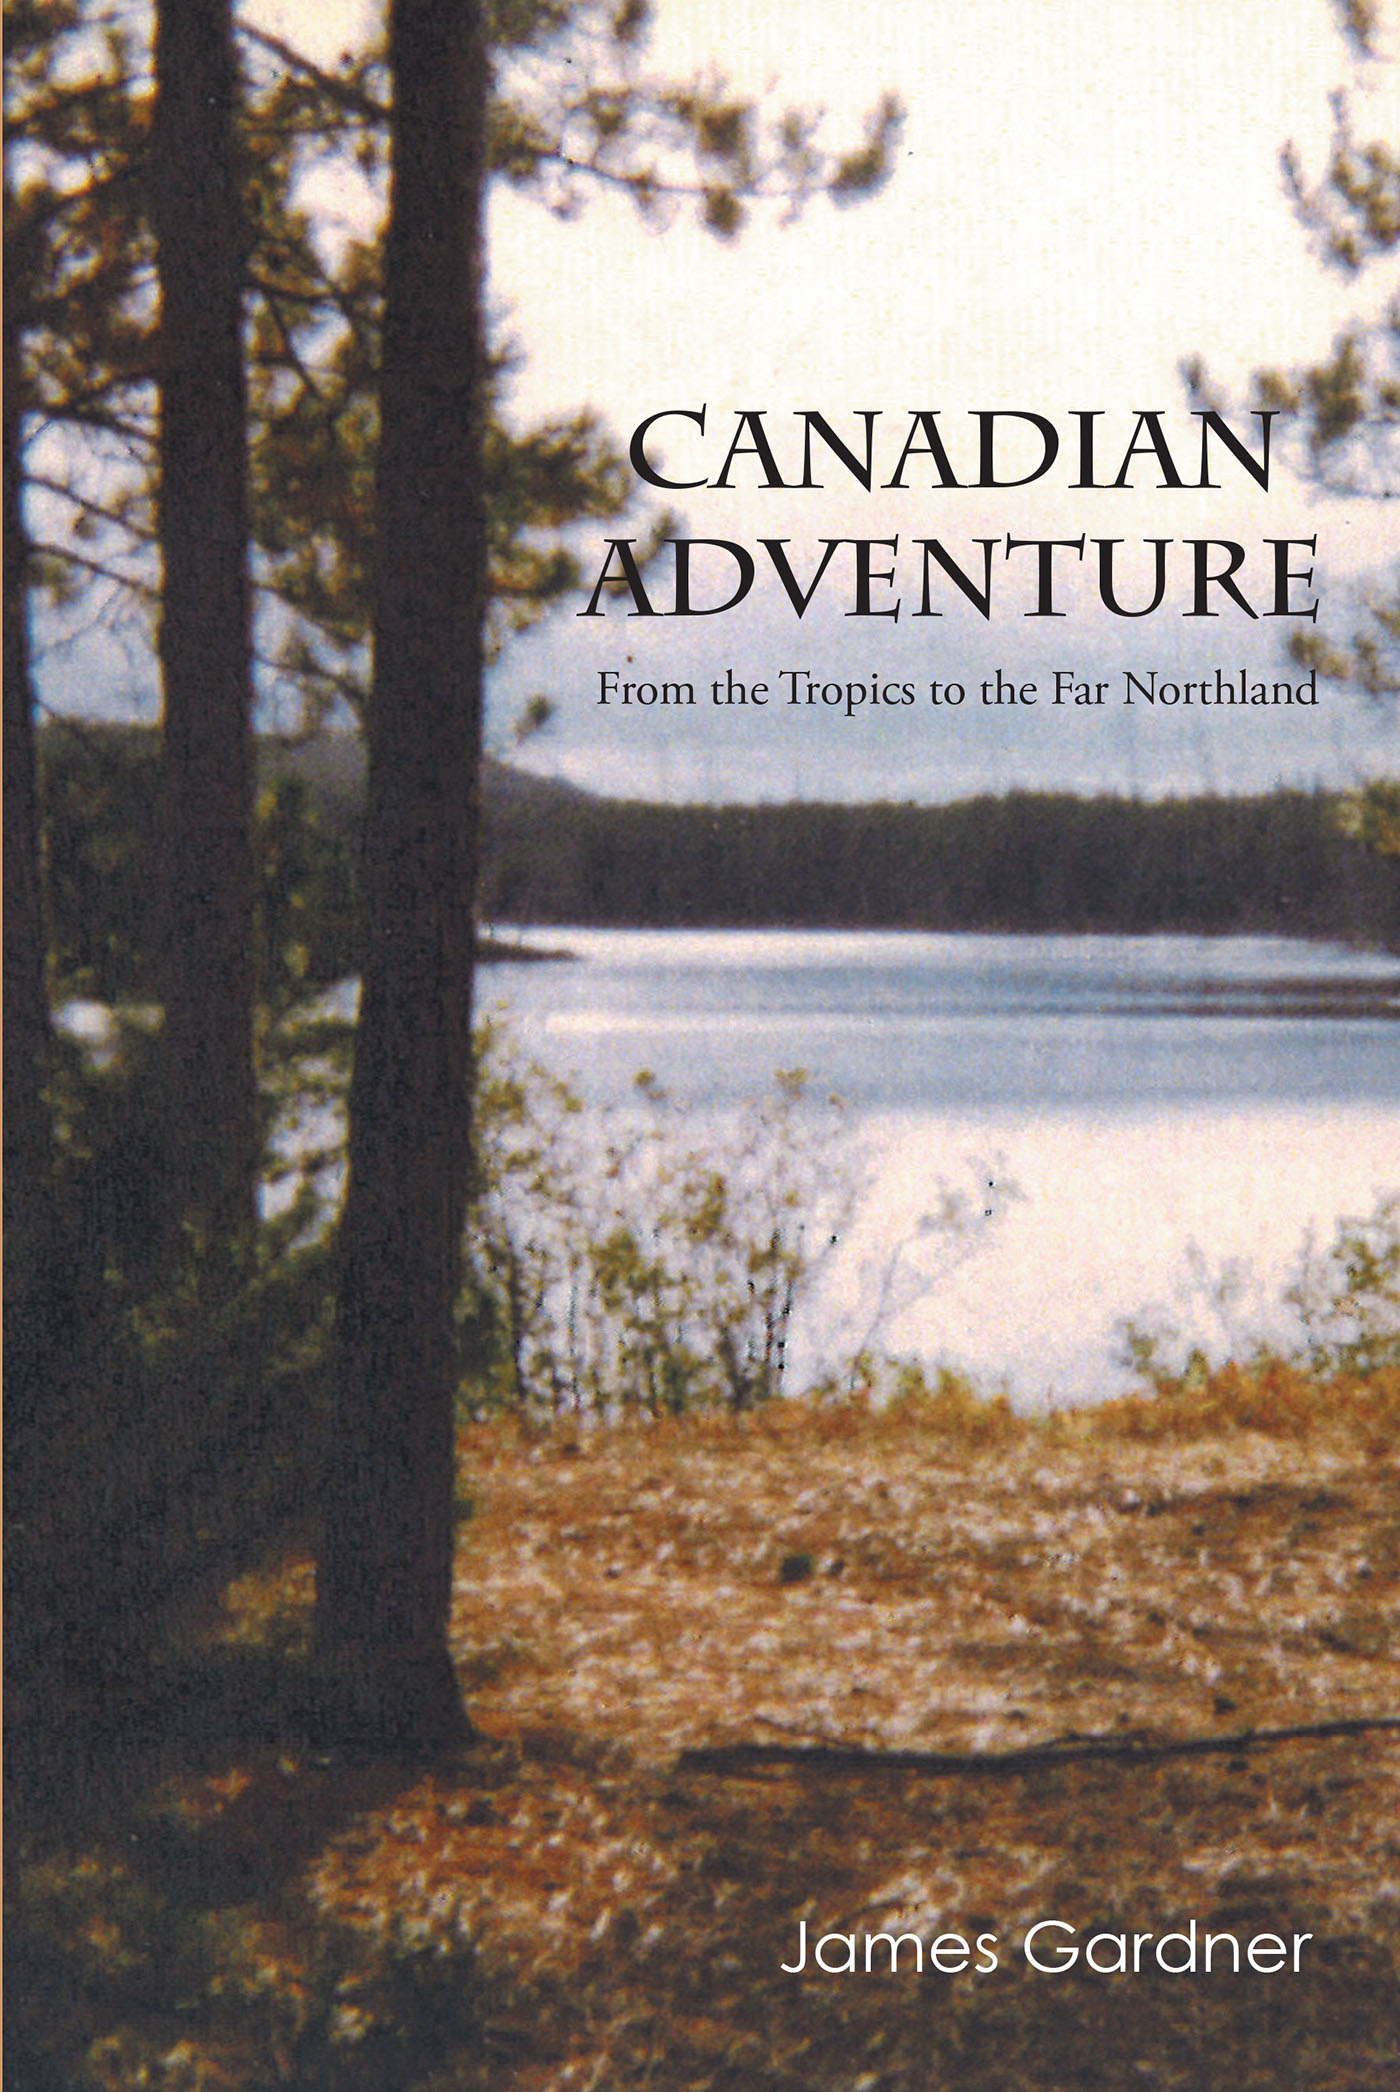 Author James Gardner’s New Book, “Canadian Adventure: From the Tropics to the Far Northland,” Continues the Tales of Captain Mobley and His Adventure-Seeking Crew